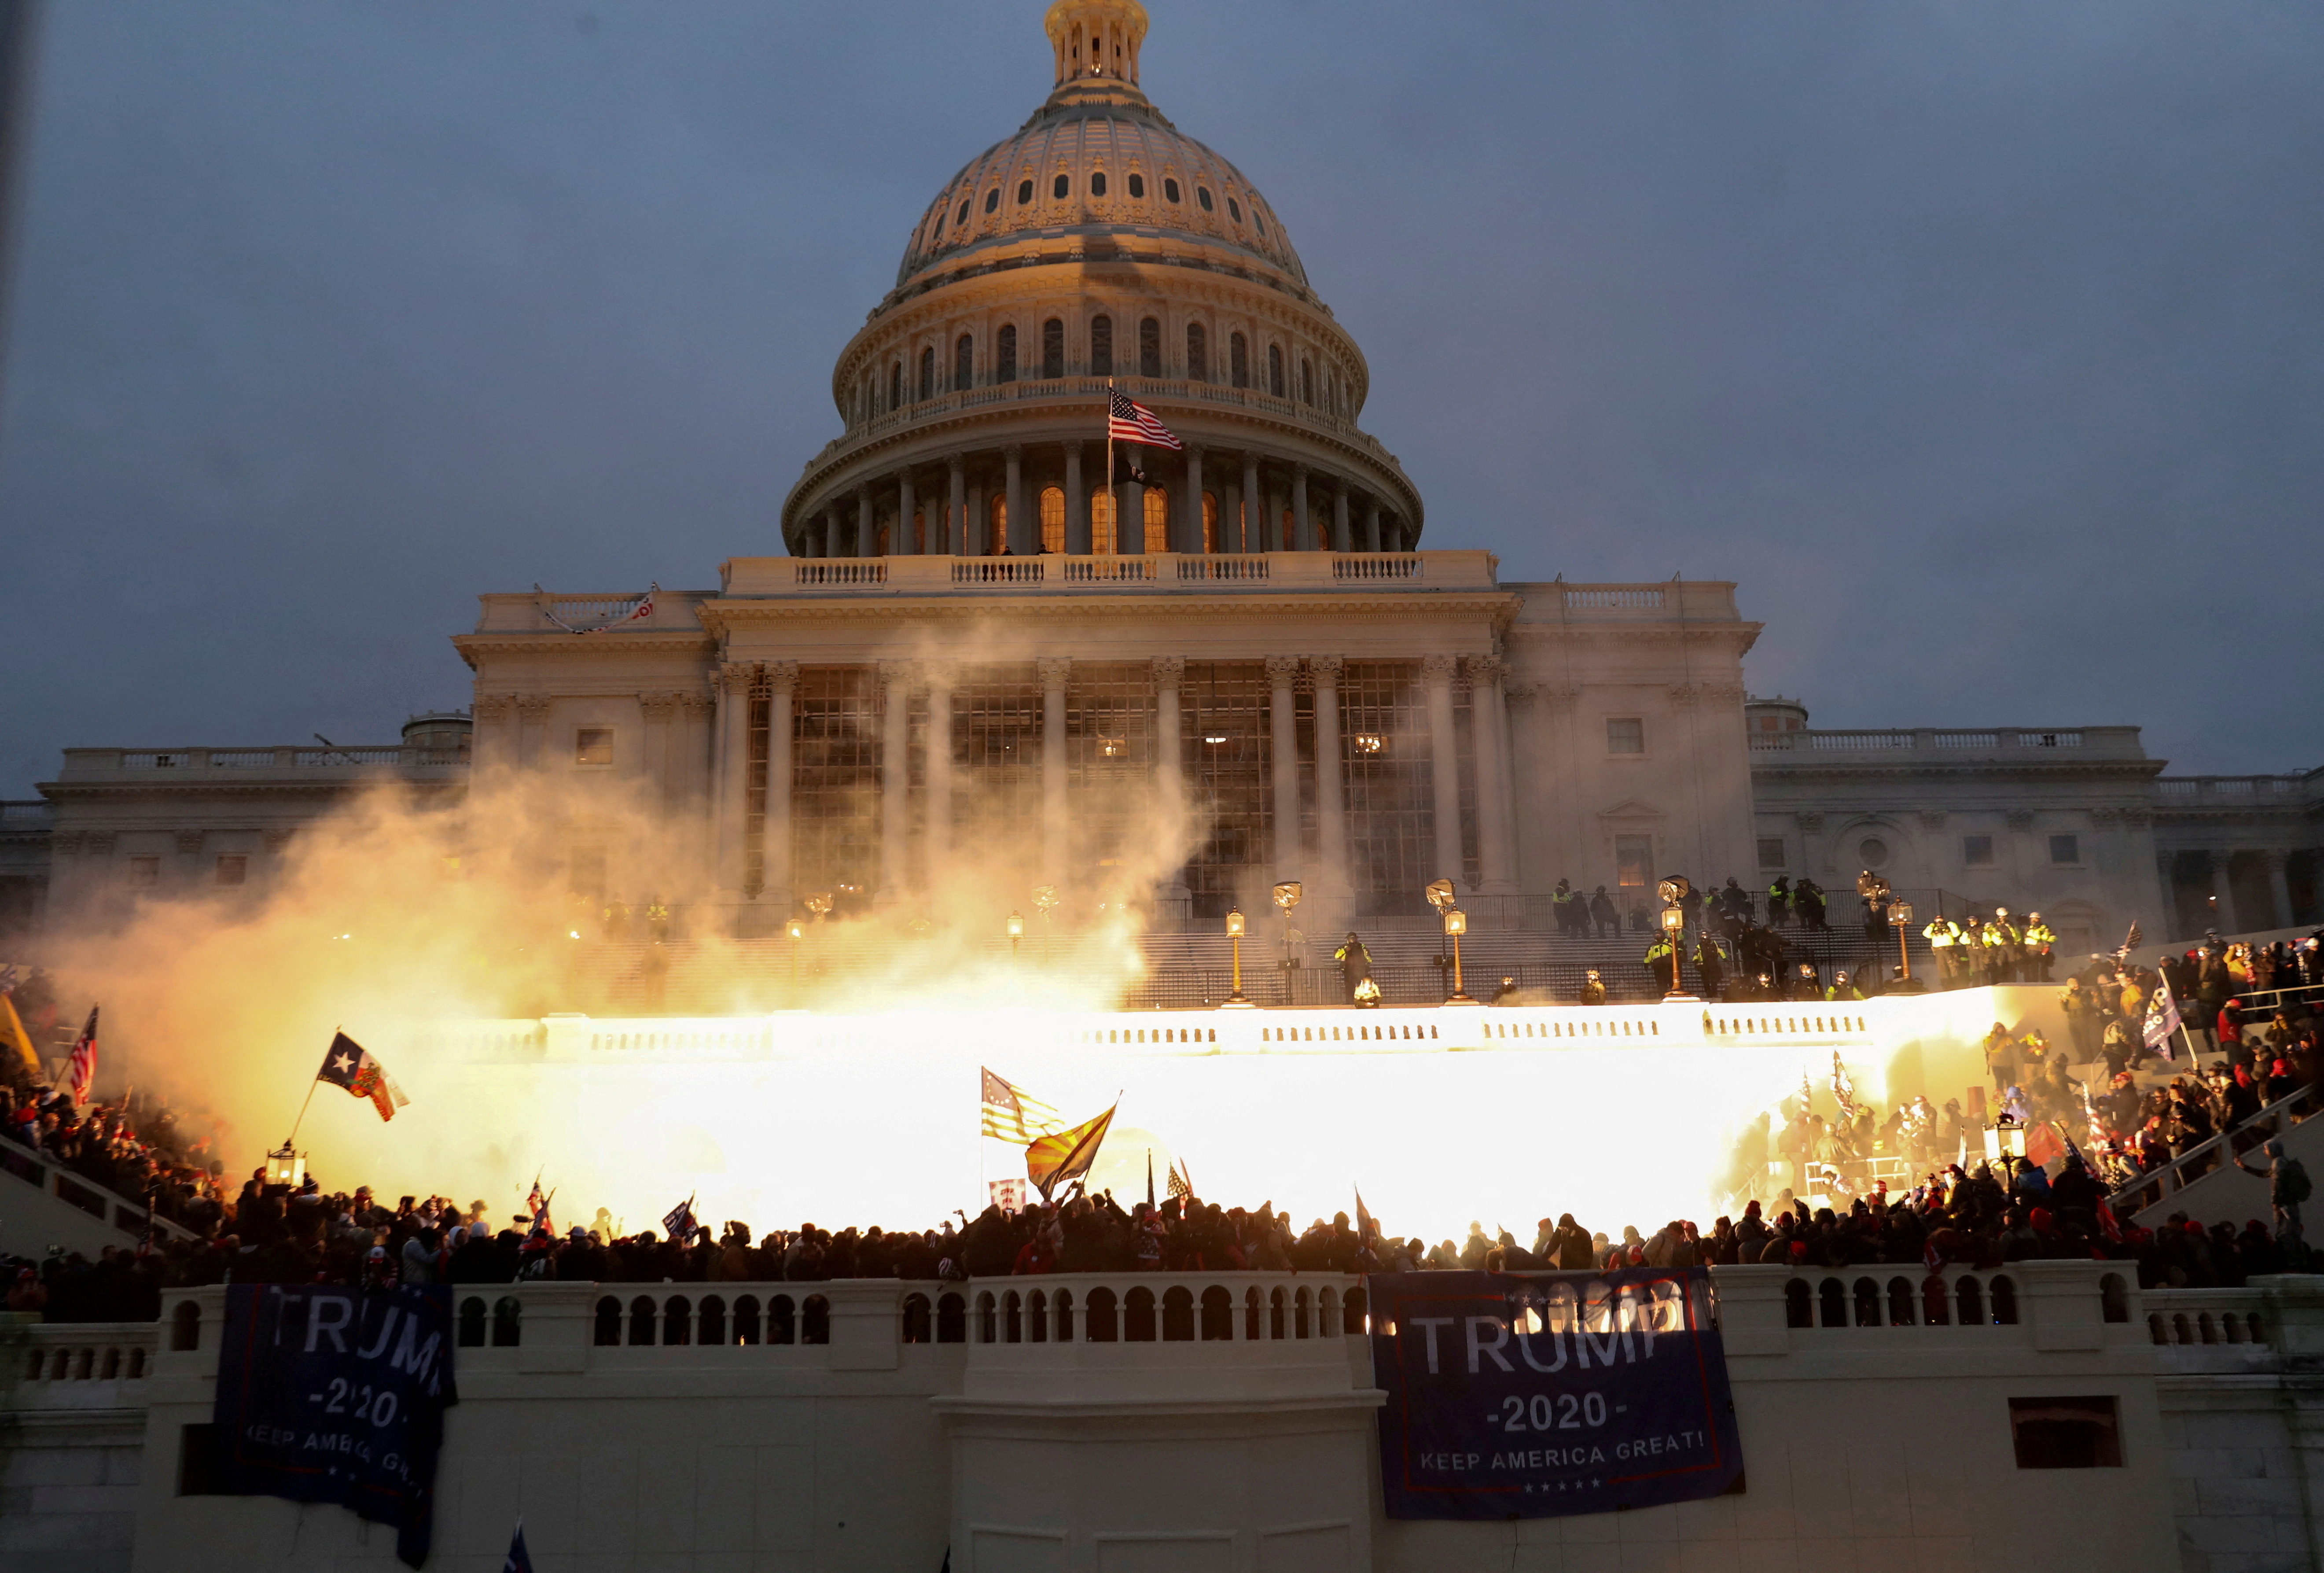 An explosion caused by a police munition is seen while supporters of former president Trump gather in front of the U.S. Capitol